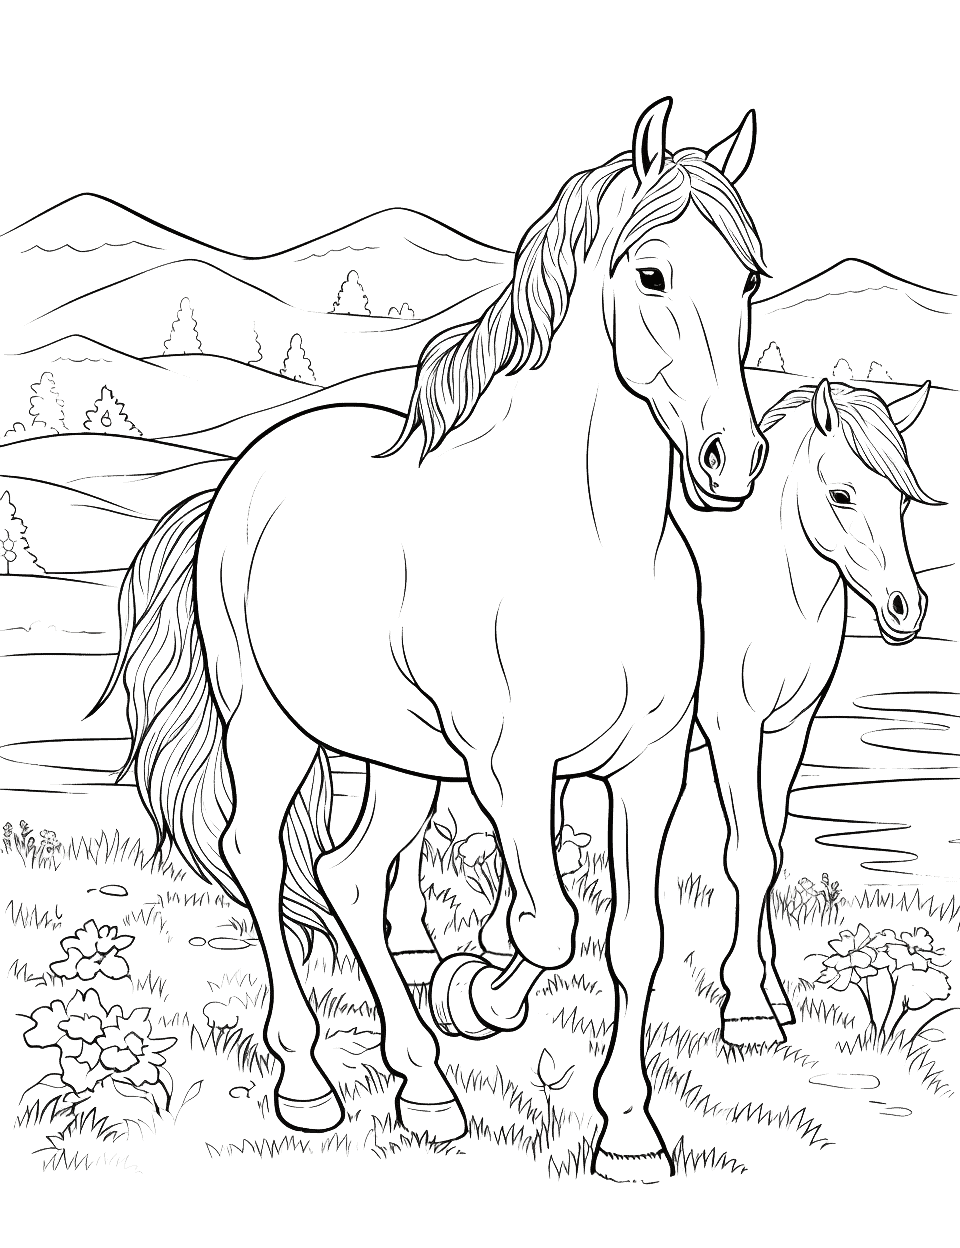 Full Page Horse Family Coloring Page - A full-page image of a horse family - stallion and mare - in their natural habitat.